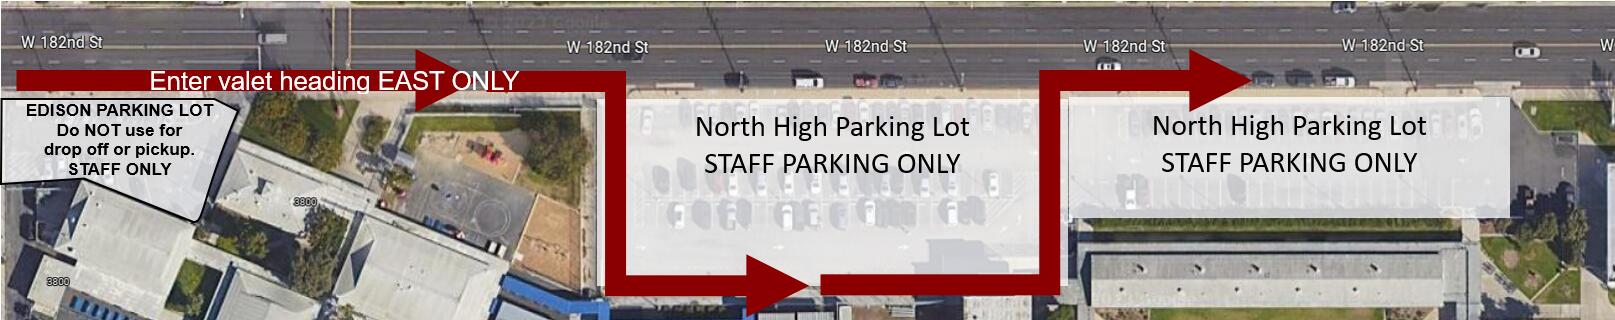 Picture showing how to enter the North High Valet Line, entering heading East only. 